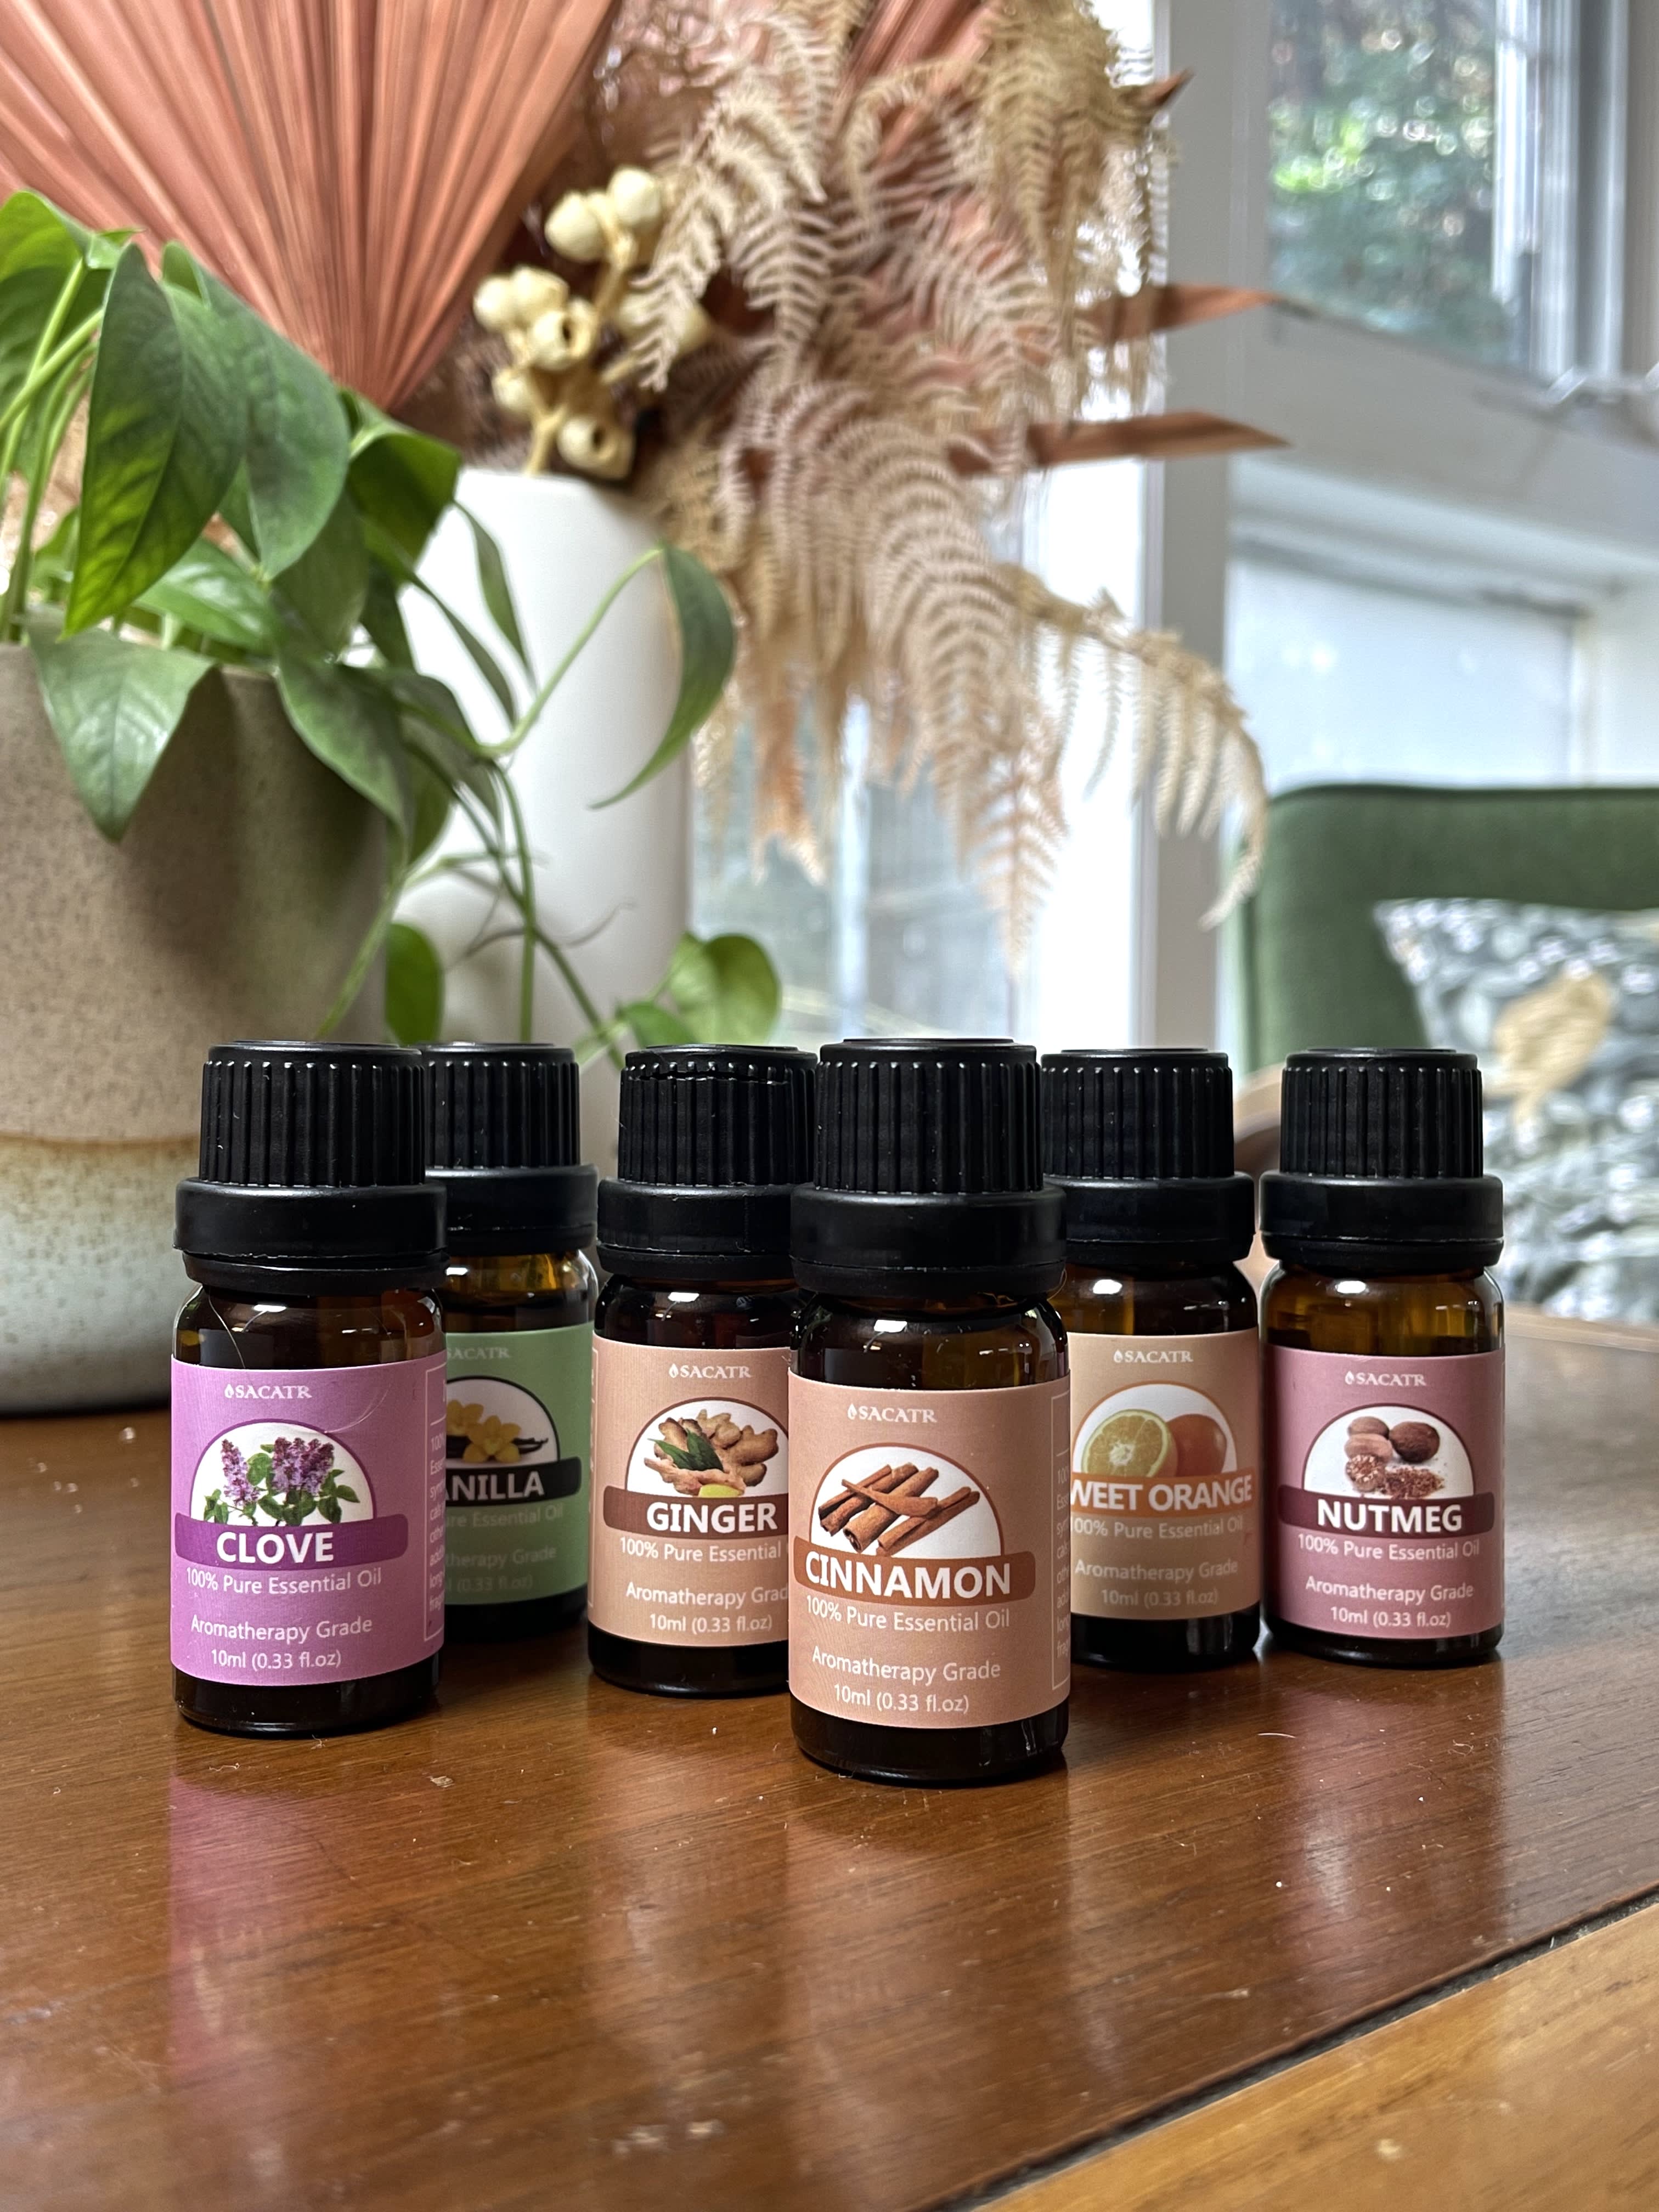 Fall Essential Oil Diffuser Blends Instead of Candles! - The Inspired Room